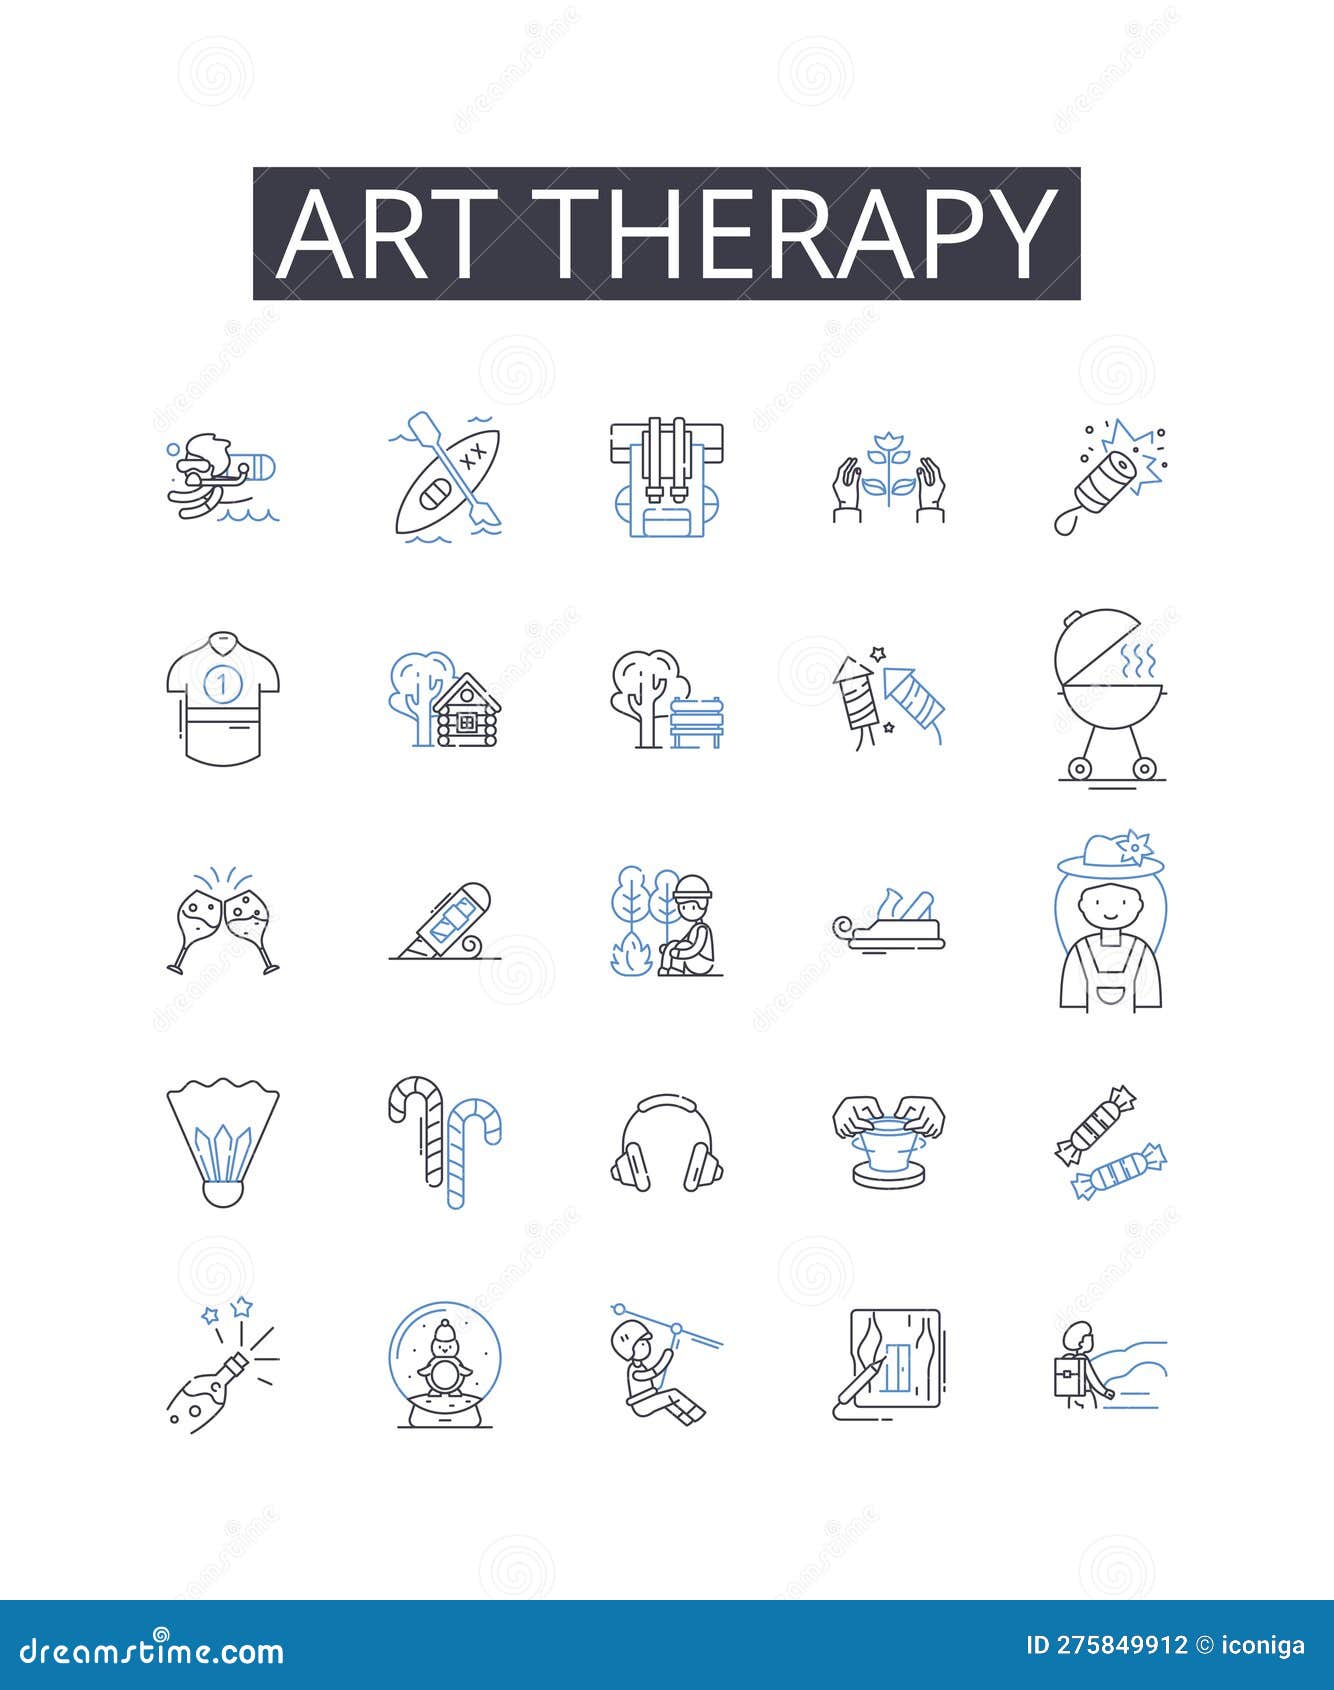 art therapy line icons collection. music therapy, play therapy, drama therapy, movement therapy, narrative therapy